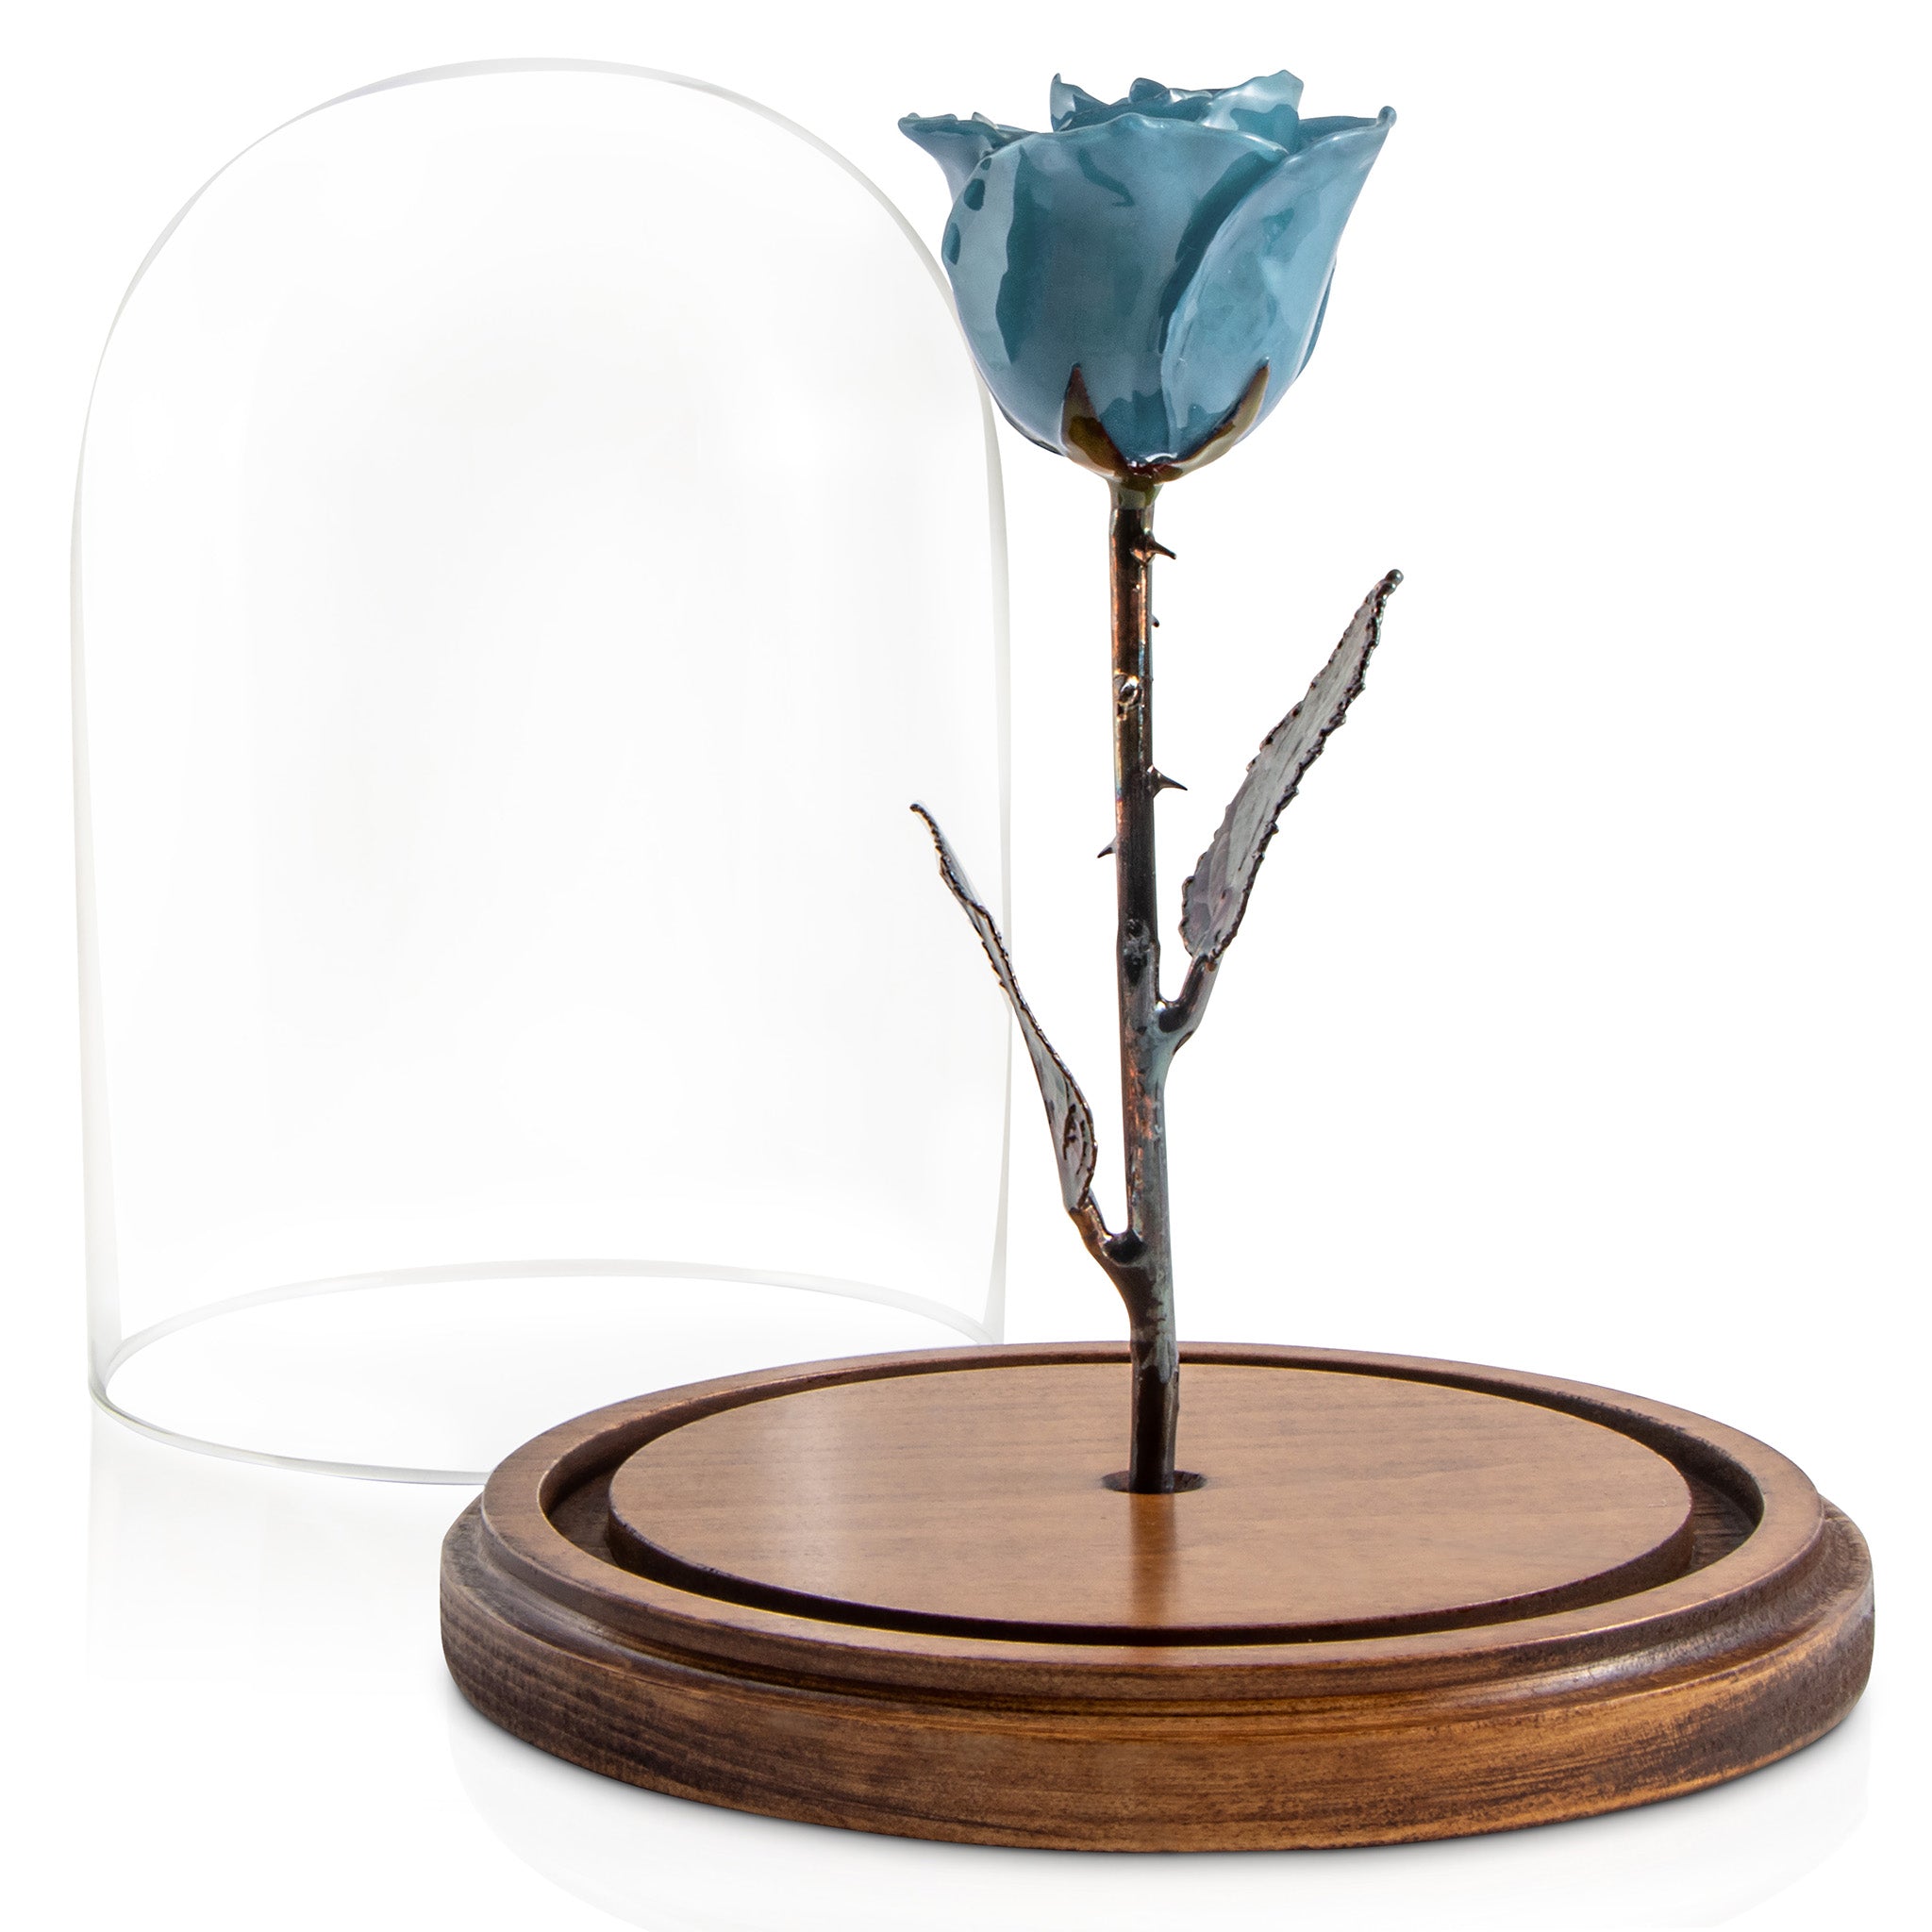 Blue Enchanted Rose (aka Beauty & The Beast Rose) with Patina Copper Stem Mounted to A Hand Turned Solid Wood Base under a glass dome. Shown with dome off.